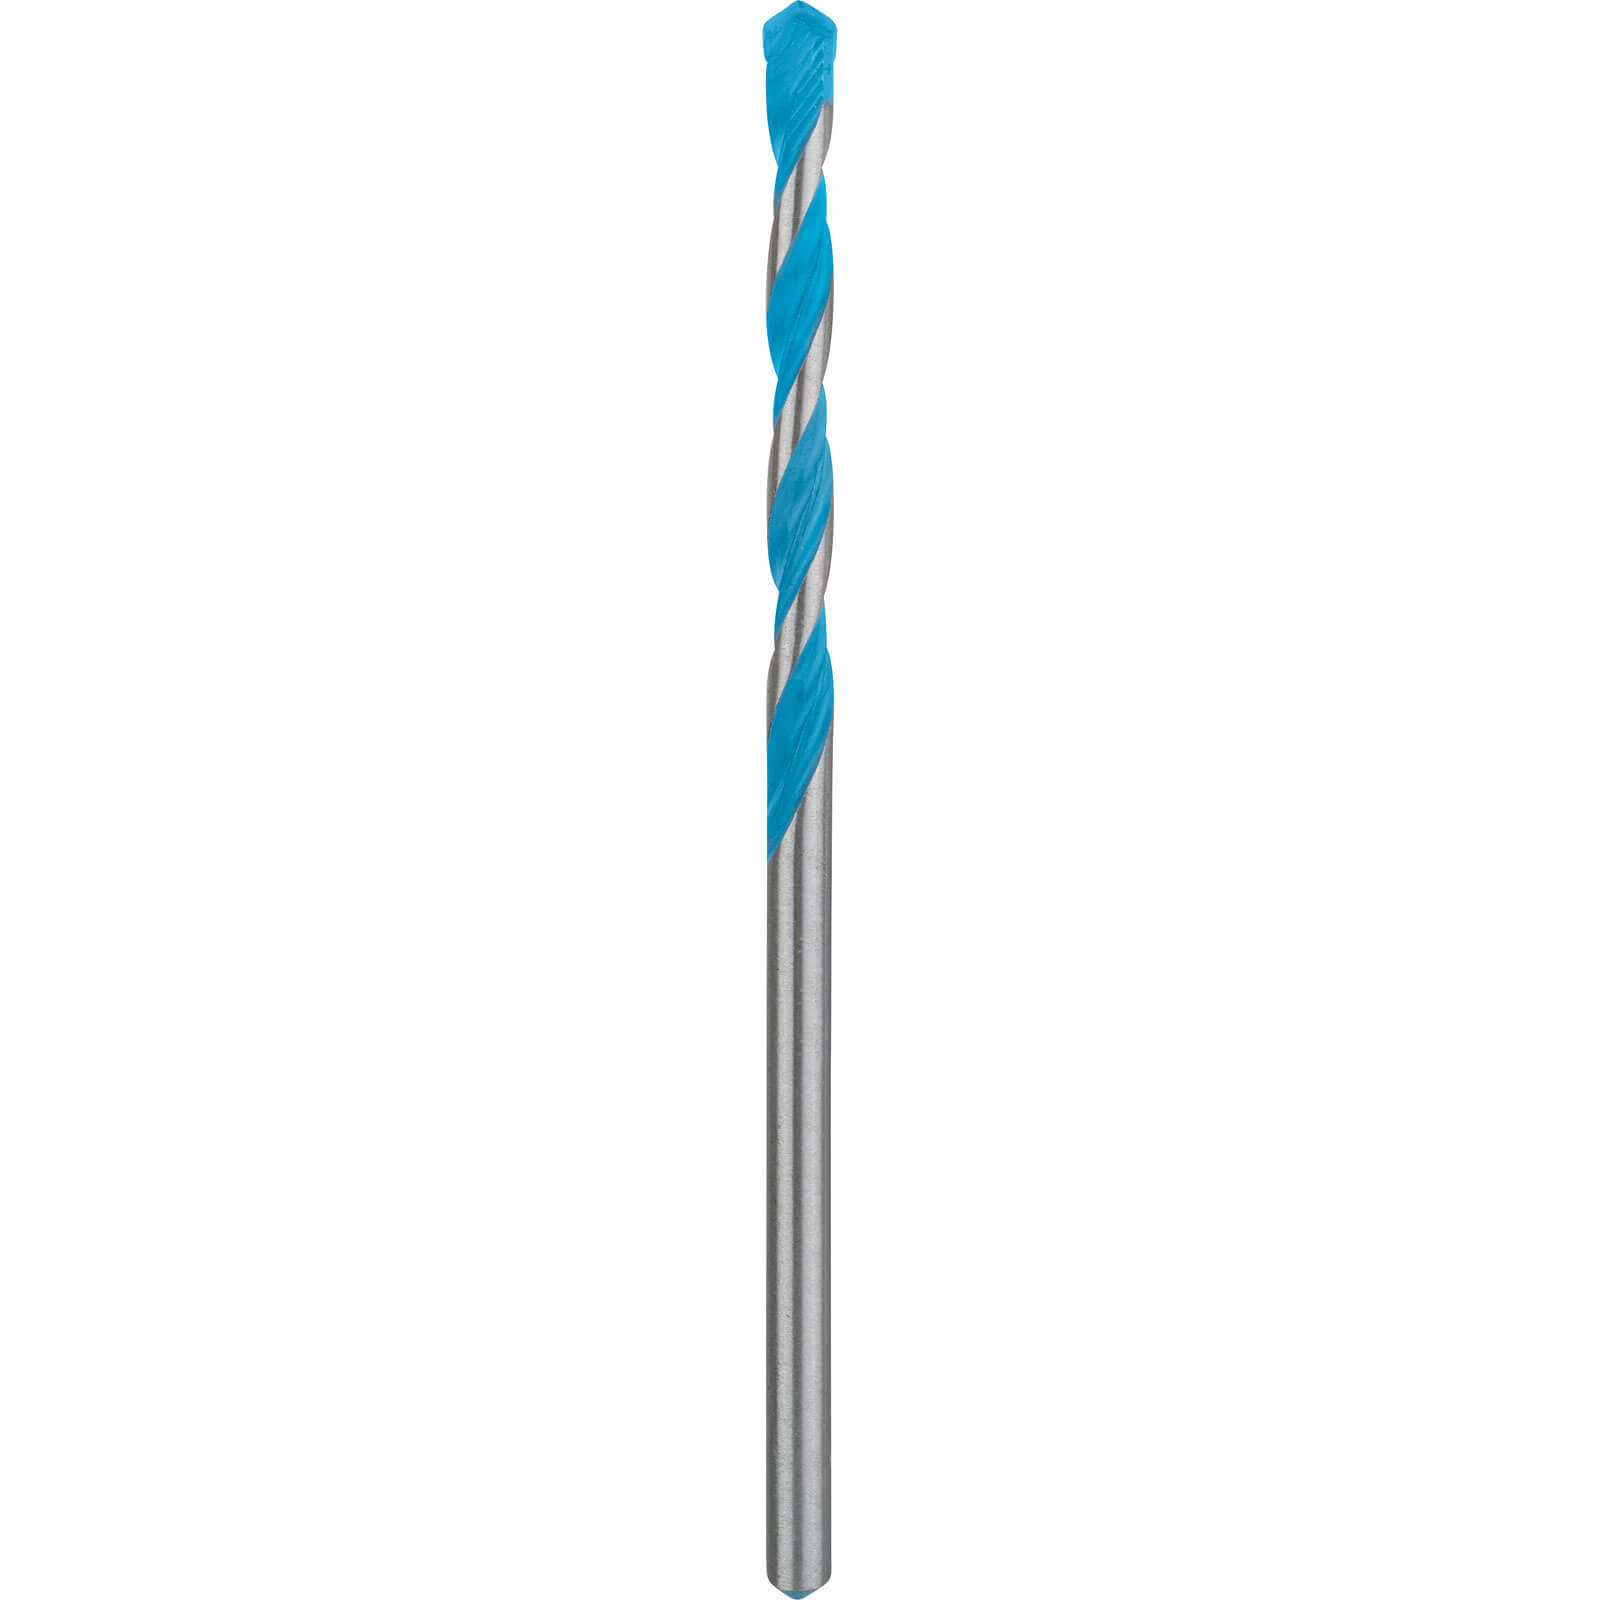 Photo of Bosch Expert Cyl-9 Multi Construction Drill Bit 7mm 150mm Pack Of 1